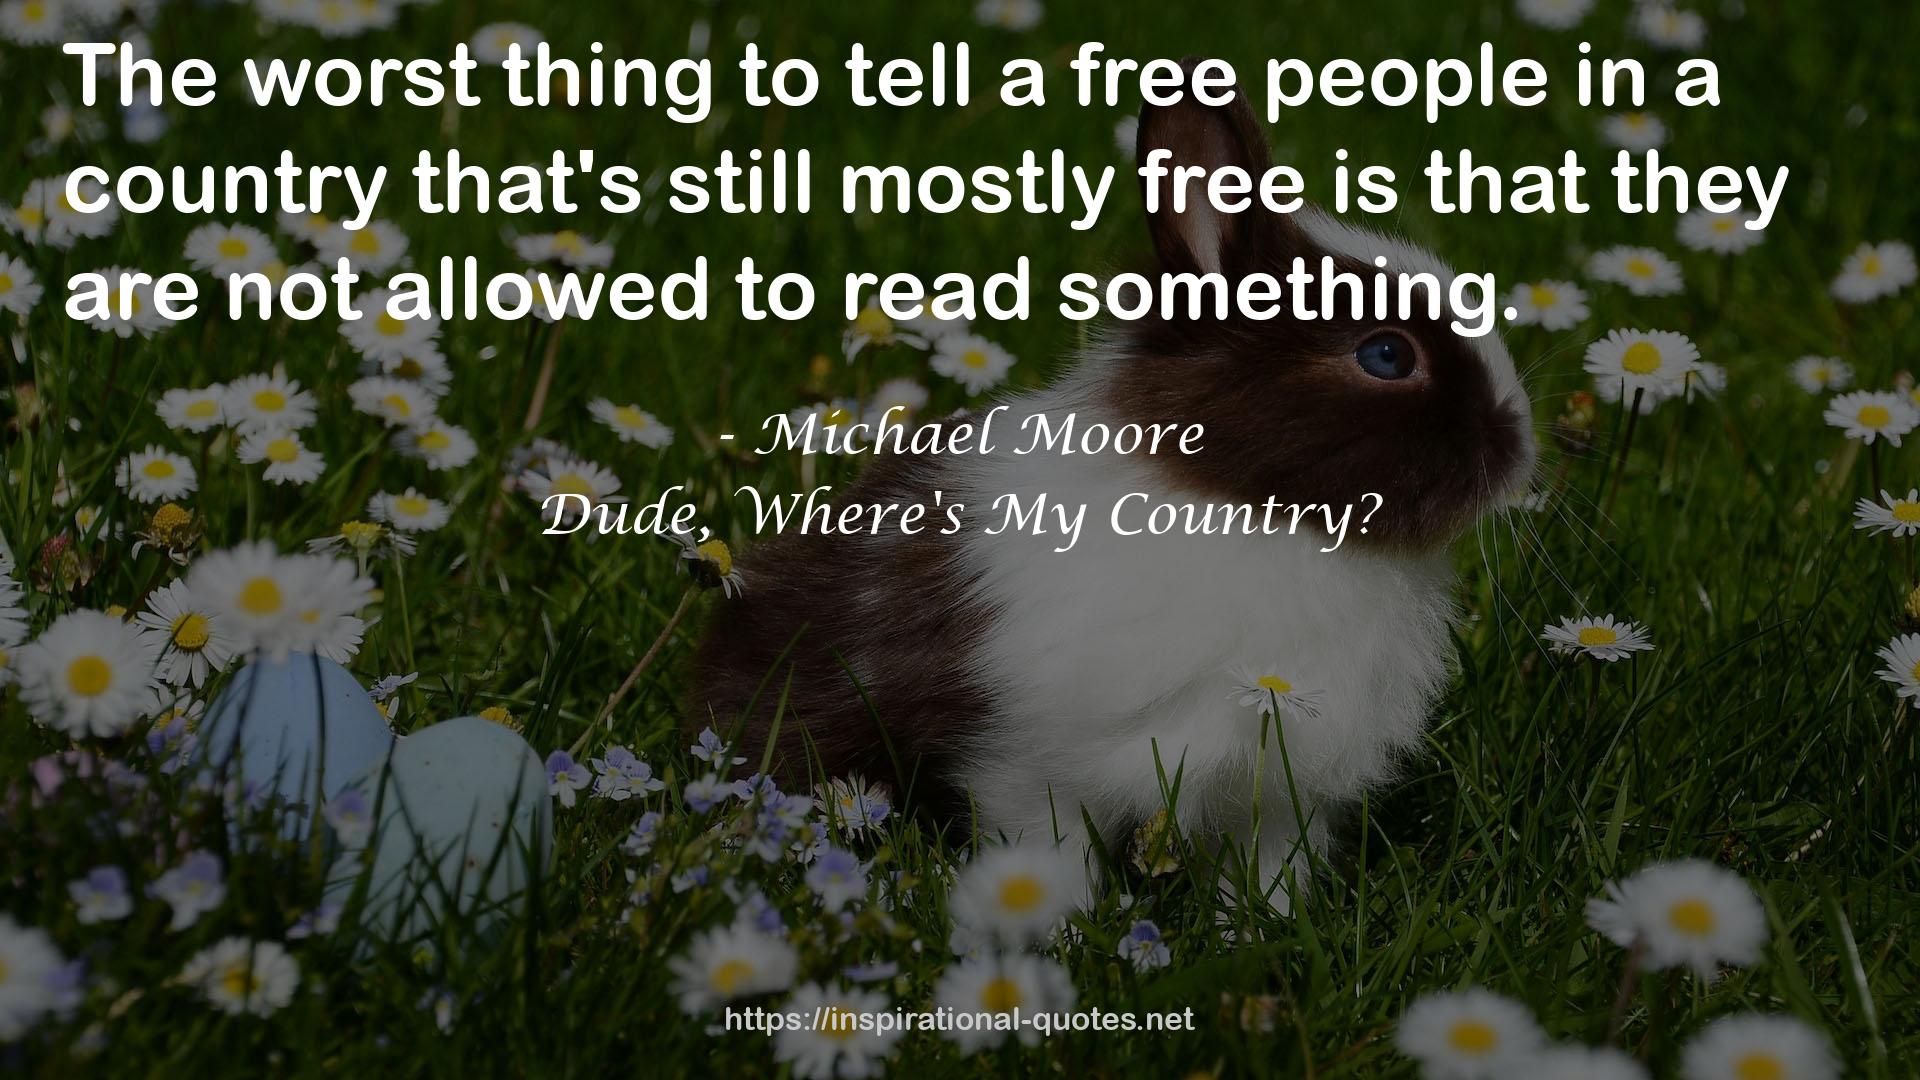 Dude, Where's My Country? QUOTES